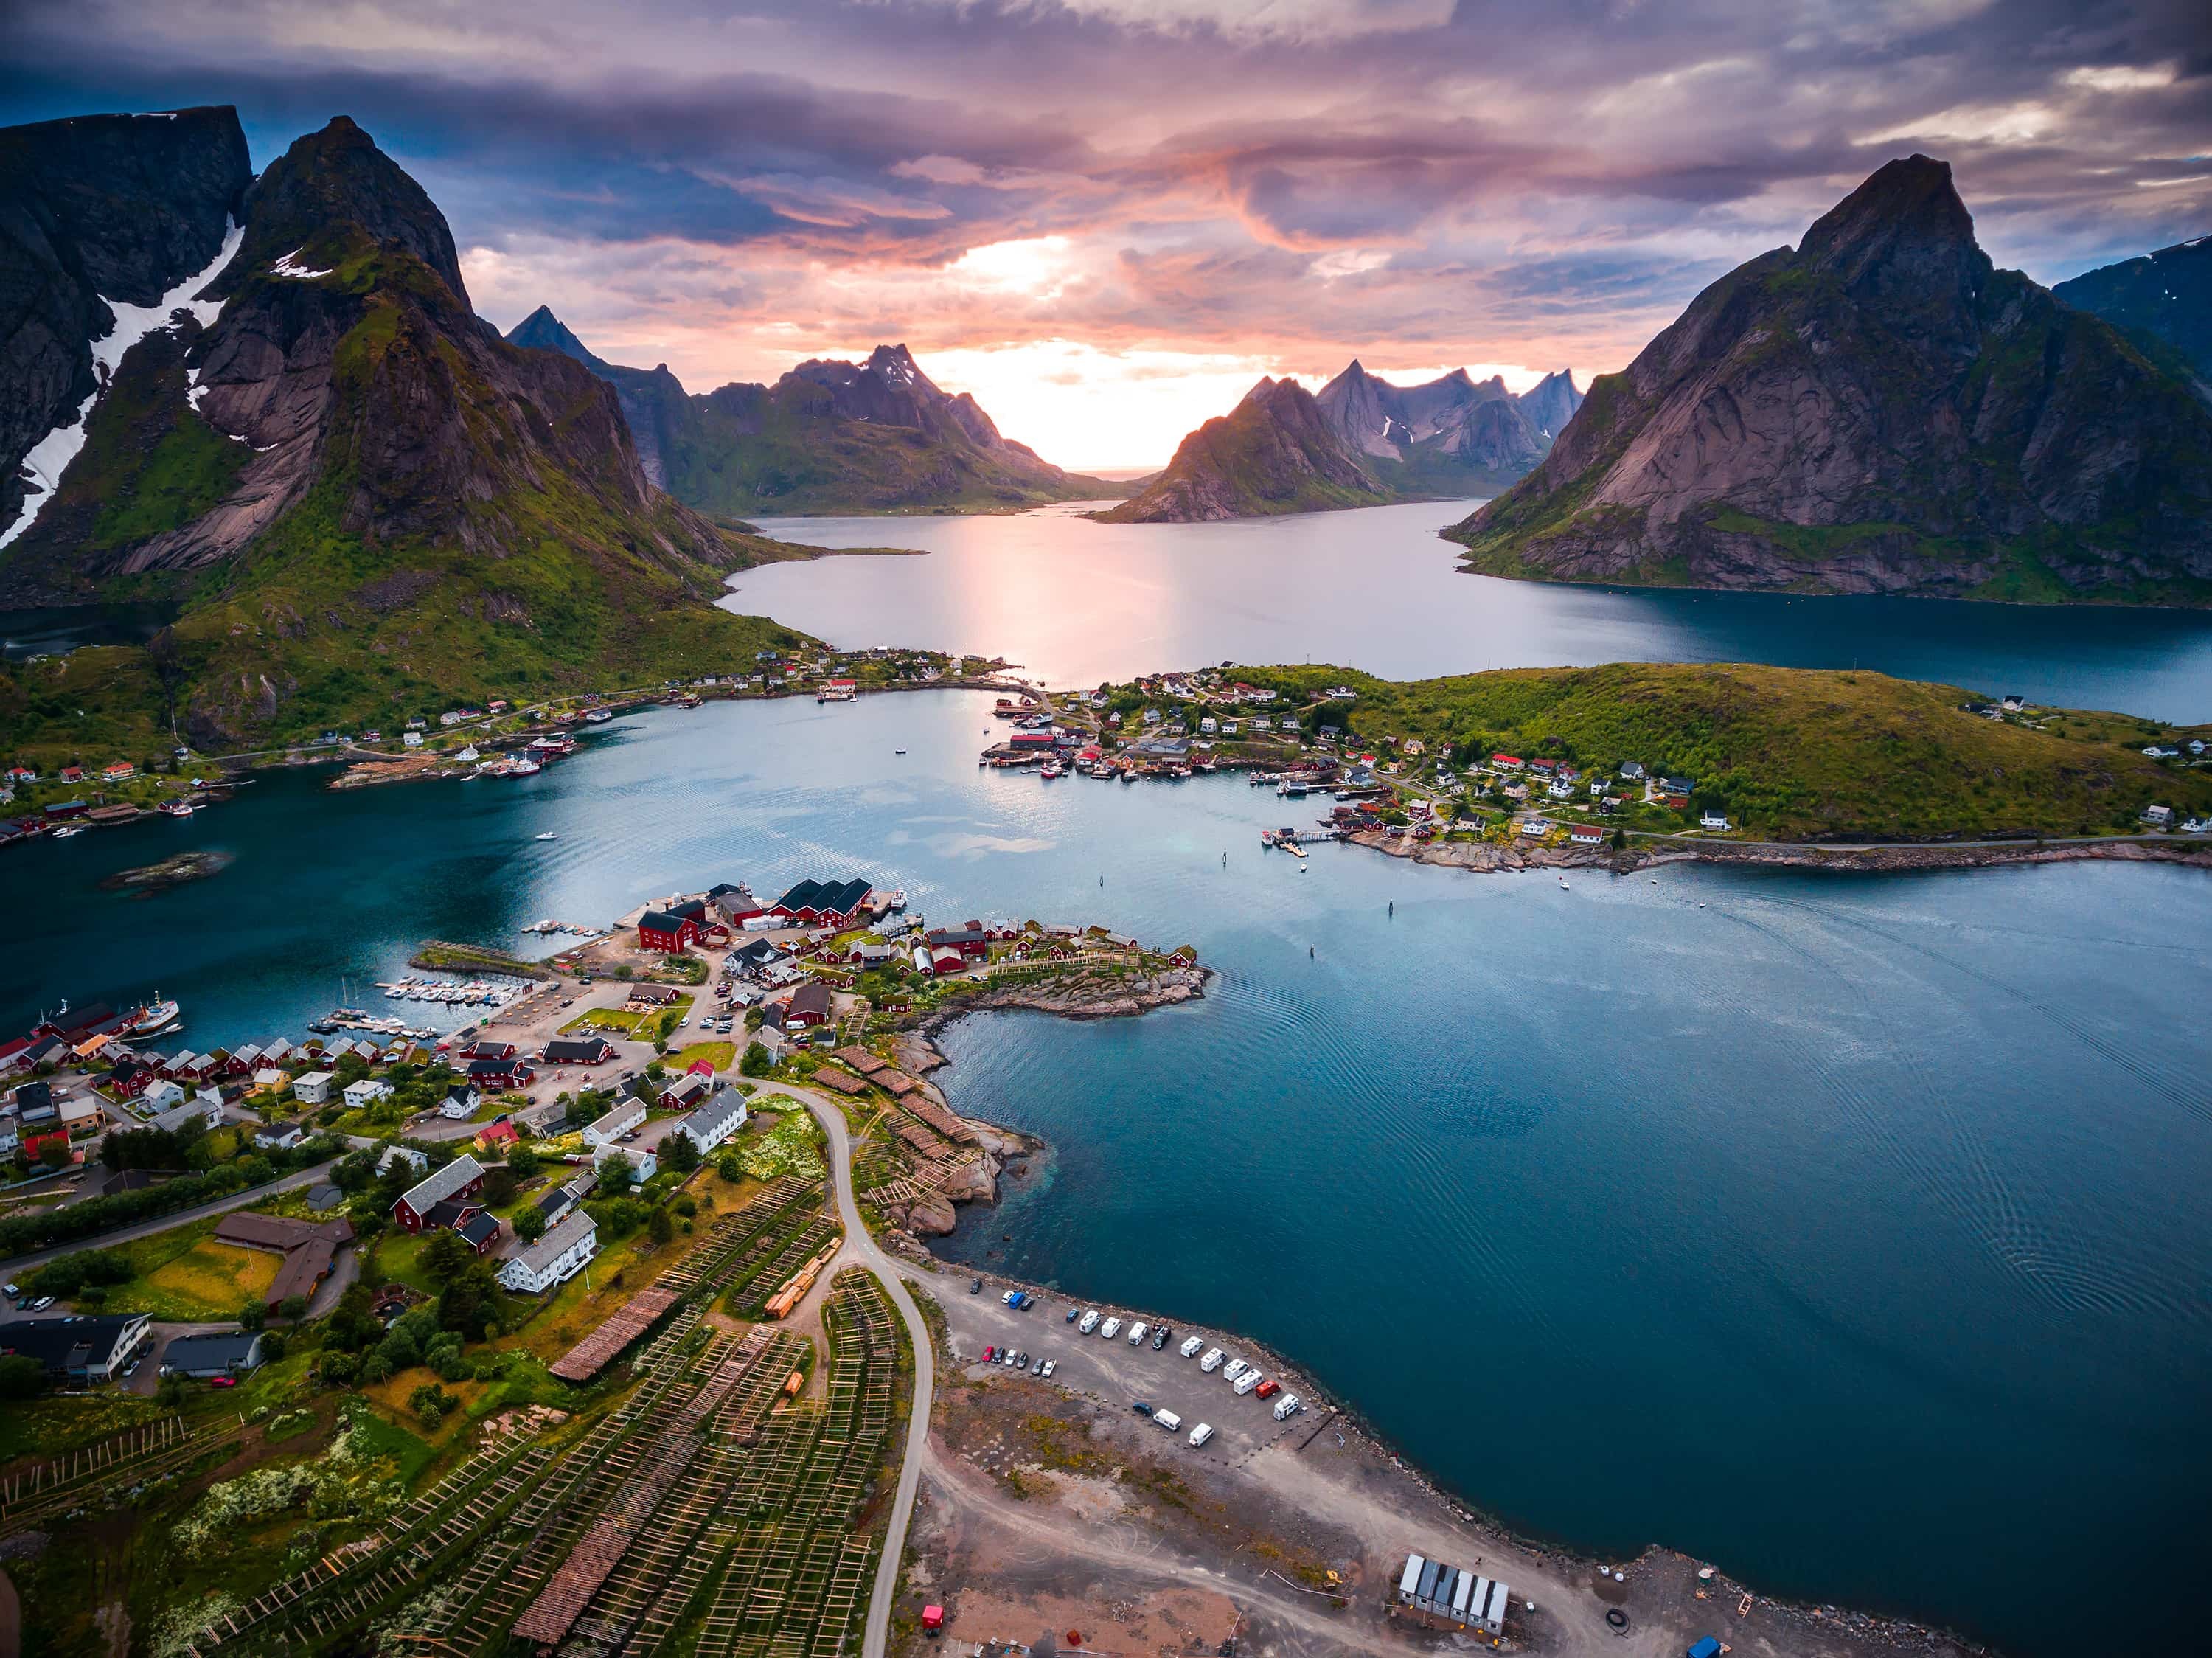 <p>Northern Norway’s <a href="https://thenordicnomad.com/norway/nordland/" title="https://thenordicnomad.com/norway/nordland/">Nordland region</a> is home to some of the most dramatic landscapes in the country, filled with majestic glaciers, spectacular fjords and breathtaking coastlines. Set to open in 2024, the luxurious <a href="https://www.sixsenses.com/en/new-openings/svart" title="https://www.sixsenses.com/en/new-openings/svart">Six Senses Svart</a> located just above the Arctic Circle, will be the world’s first energy-positive hotel, running entirely off-grid. Also in the region is the town of Bodø, which is one of three <a href="https://culture.ec.europa.eu/policies/culture-in-cities-and-regions/designated-capitals-of-culture" title="https://culture.ec.europa.eu/policies/culture-in-cities-and-regions/designated-capitals-of-culture">European Capitals of Culture for 2024</a>, known for its annual Parken musical festival, street art, and boutique shops.</p>